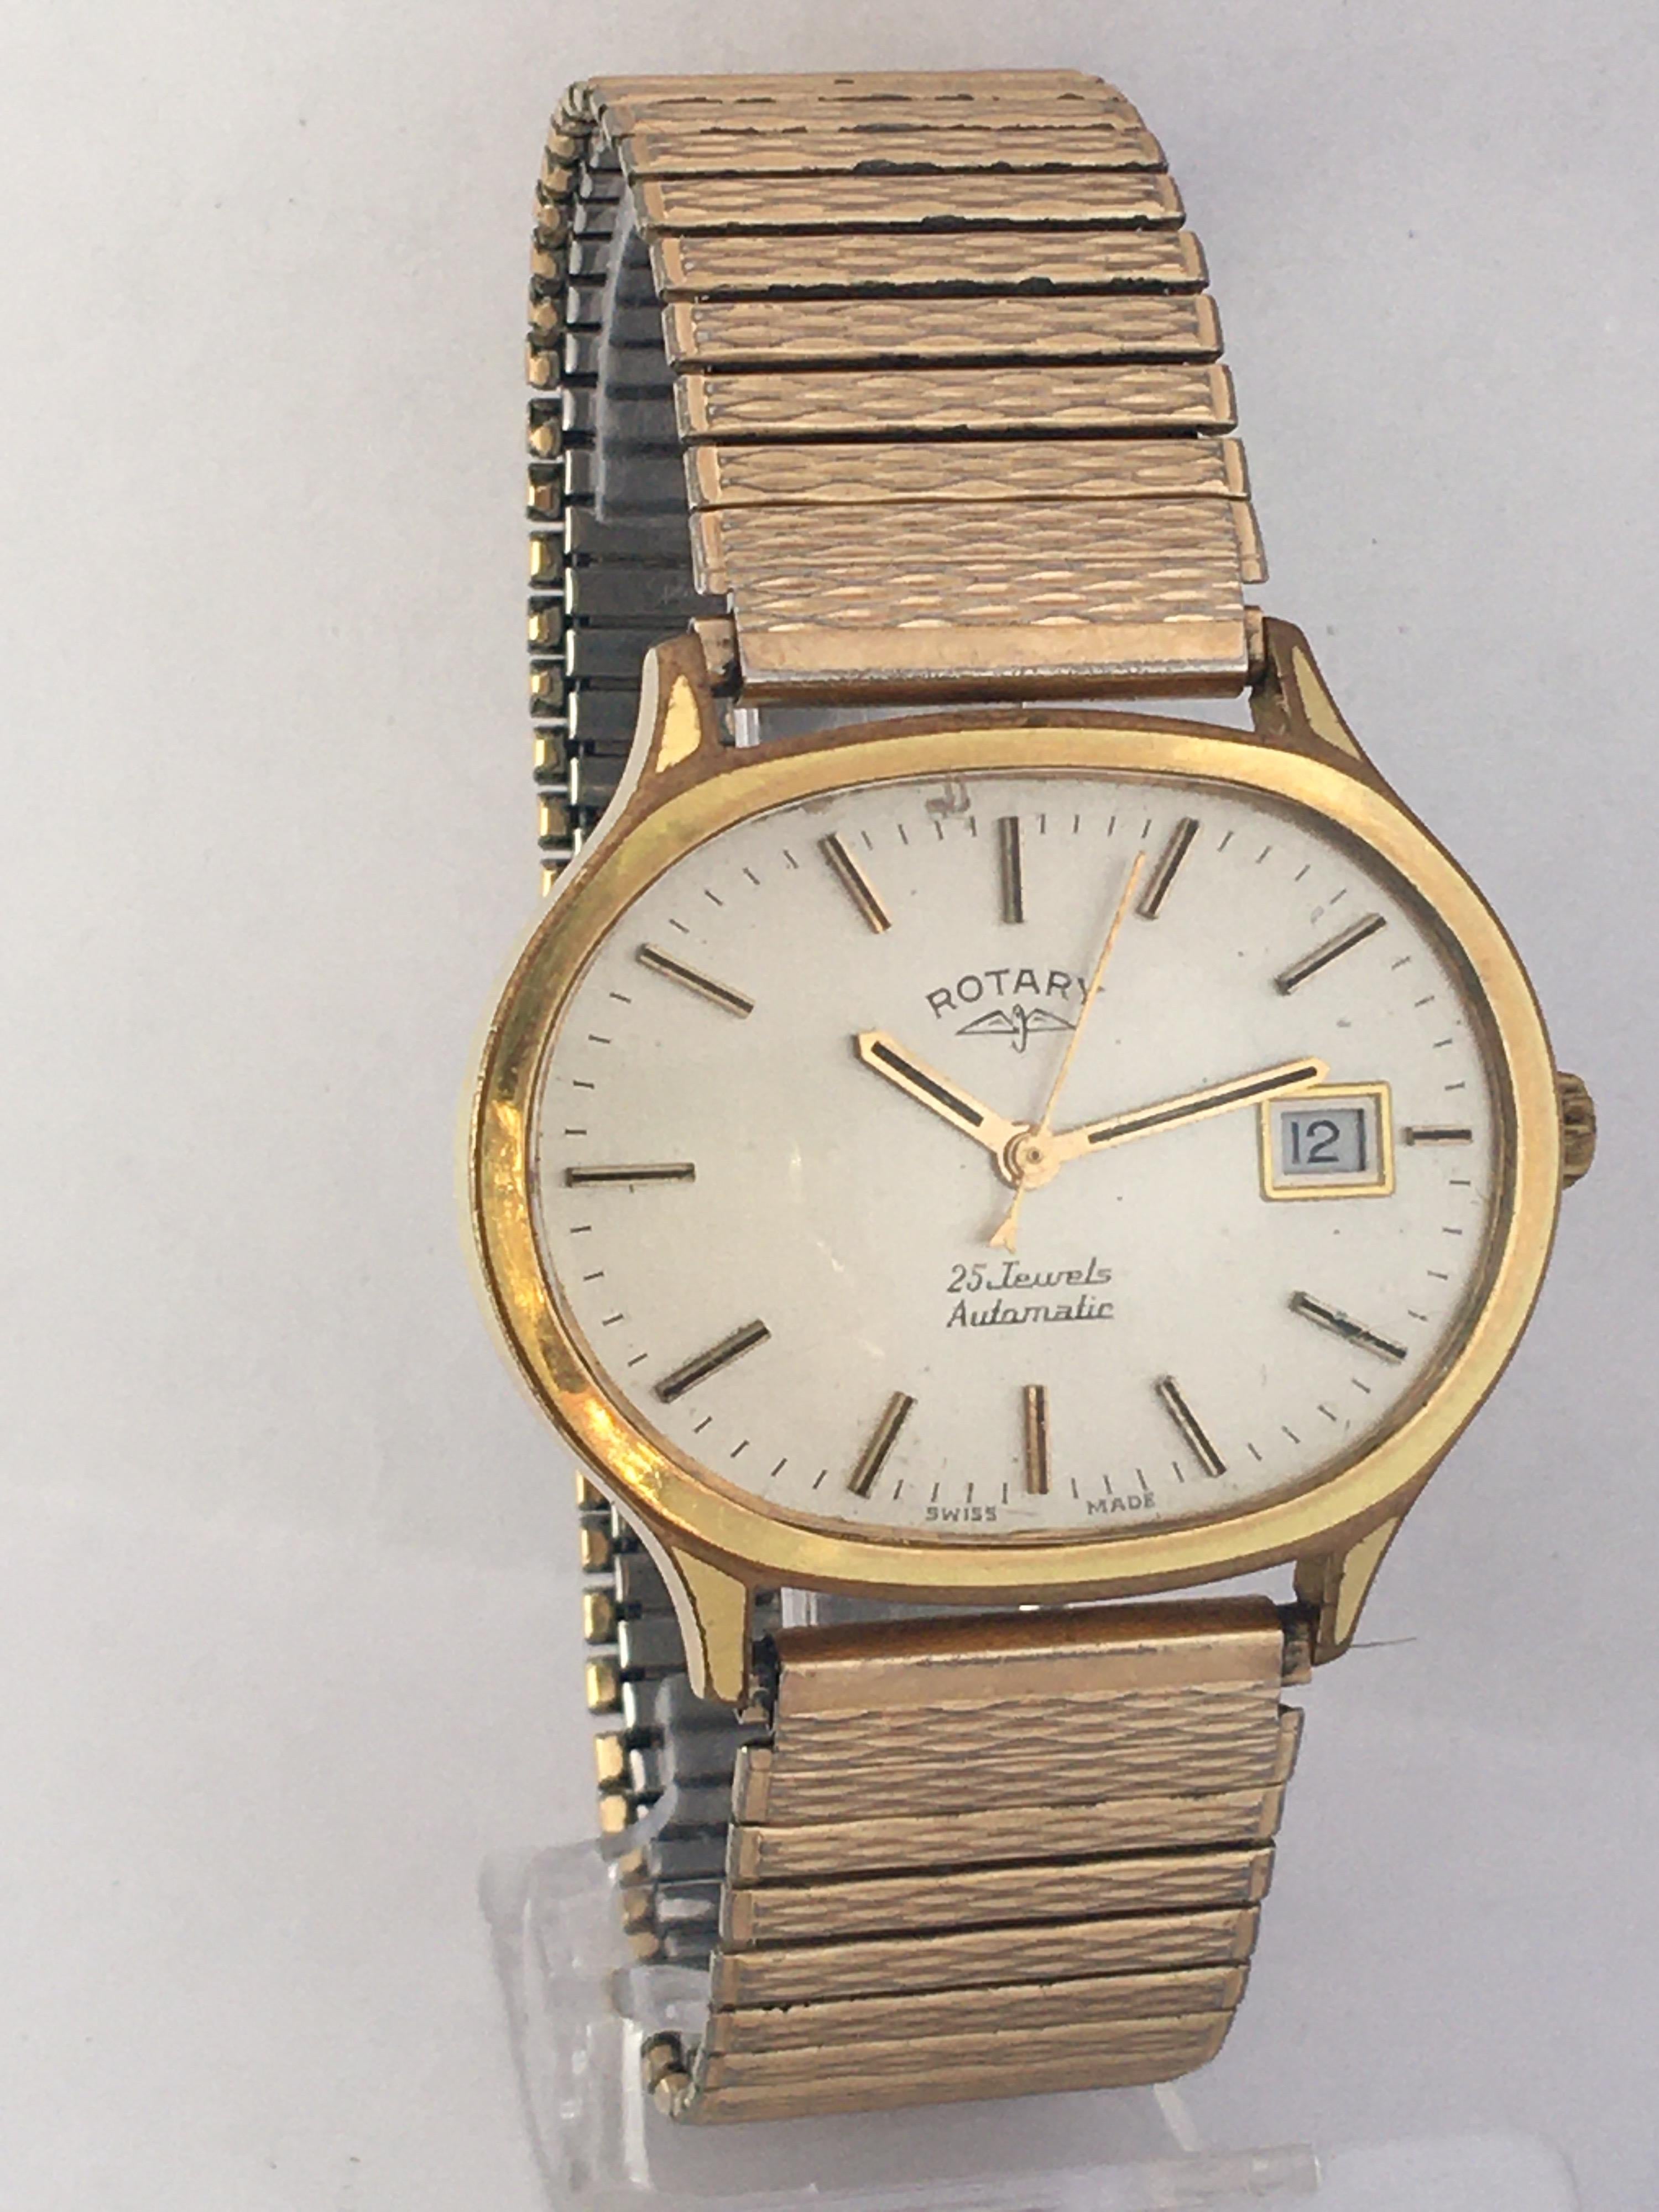 Vintage 1970s Gold-Plated/ Stainless Steel Back ROTARY 25 Jewels Automatic Watch 8